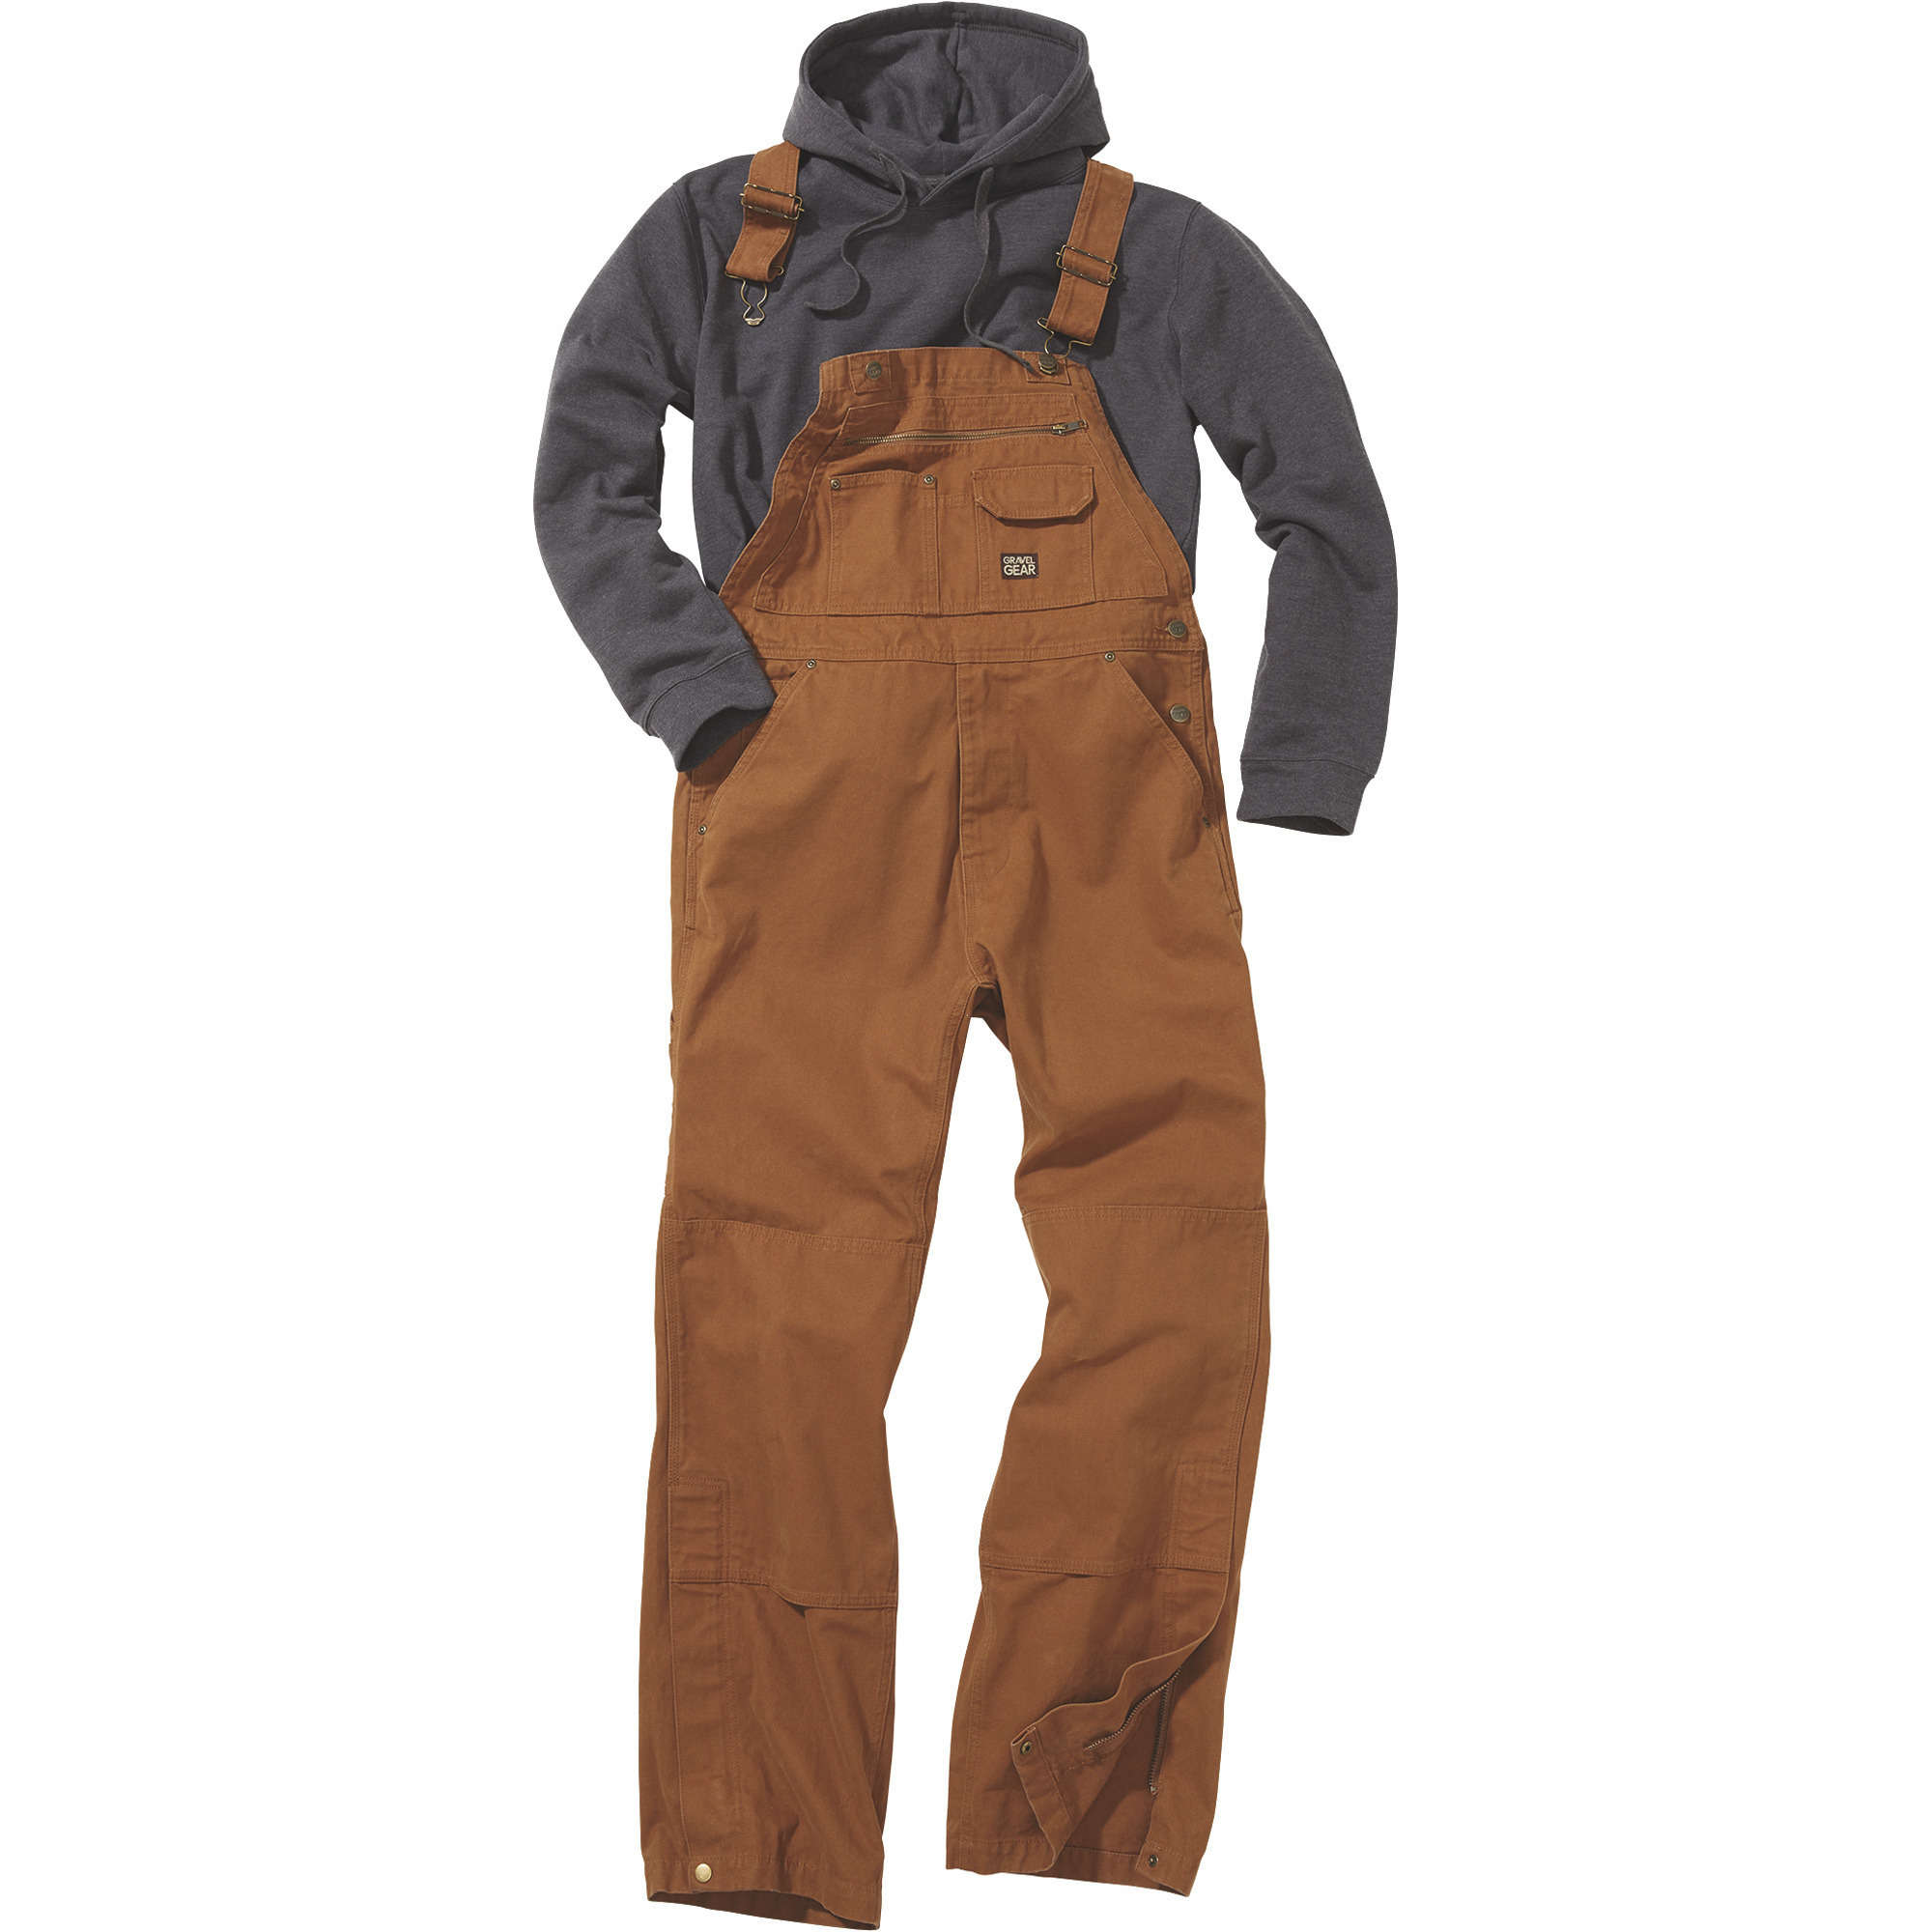 Gravel Gear Men's Unlined 12-oz. Duck Overalls with Teflon Fabric Protector â Brown Duck, 34Inch Waist x 32Inch Inseam